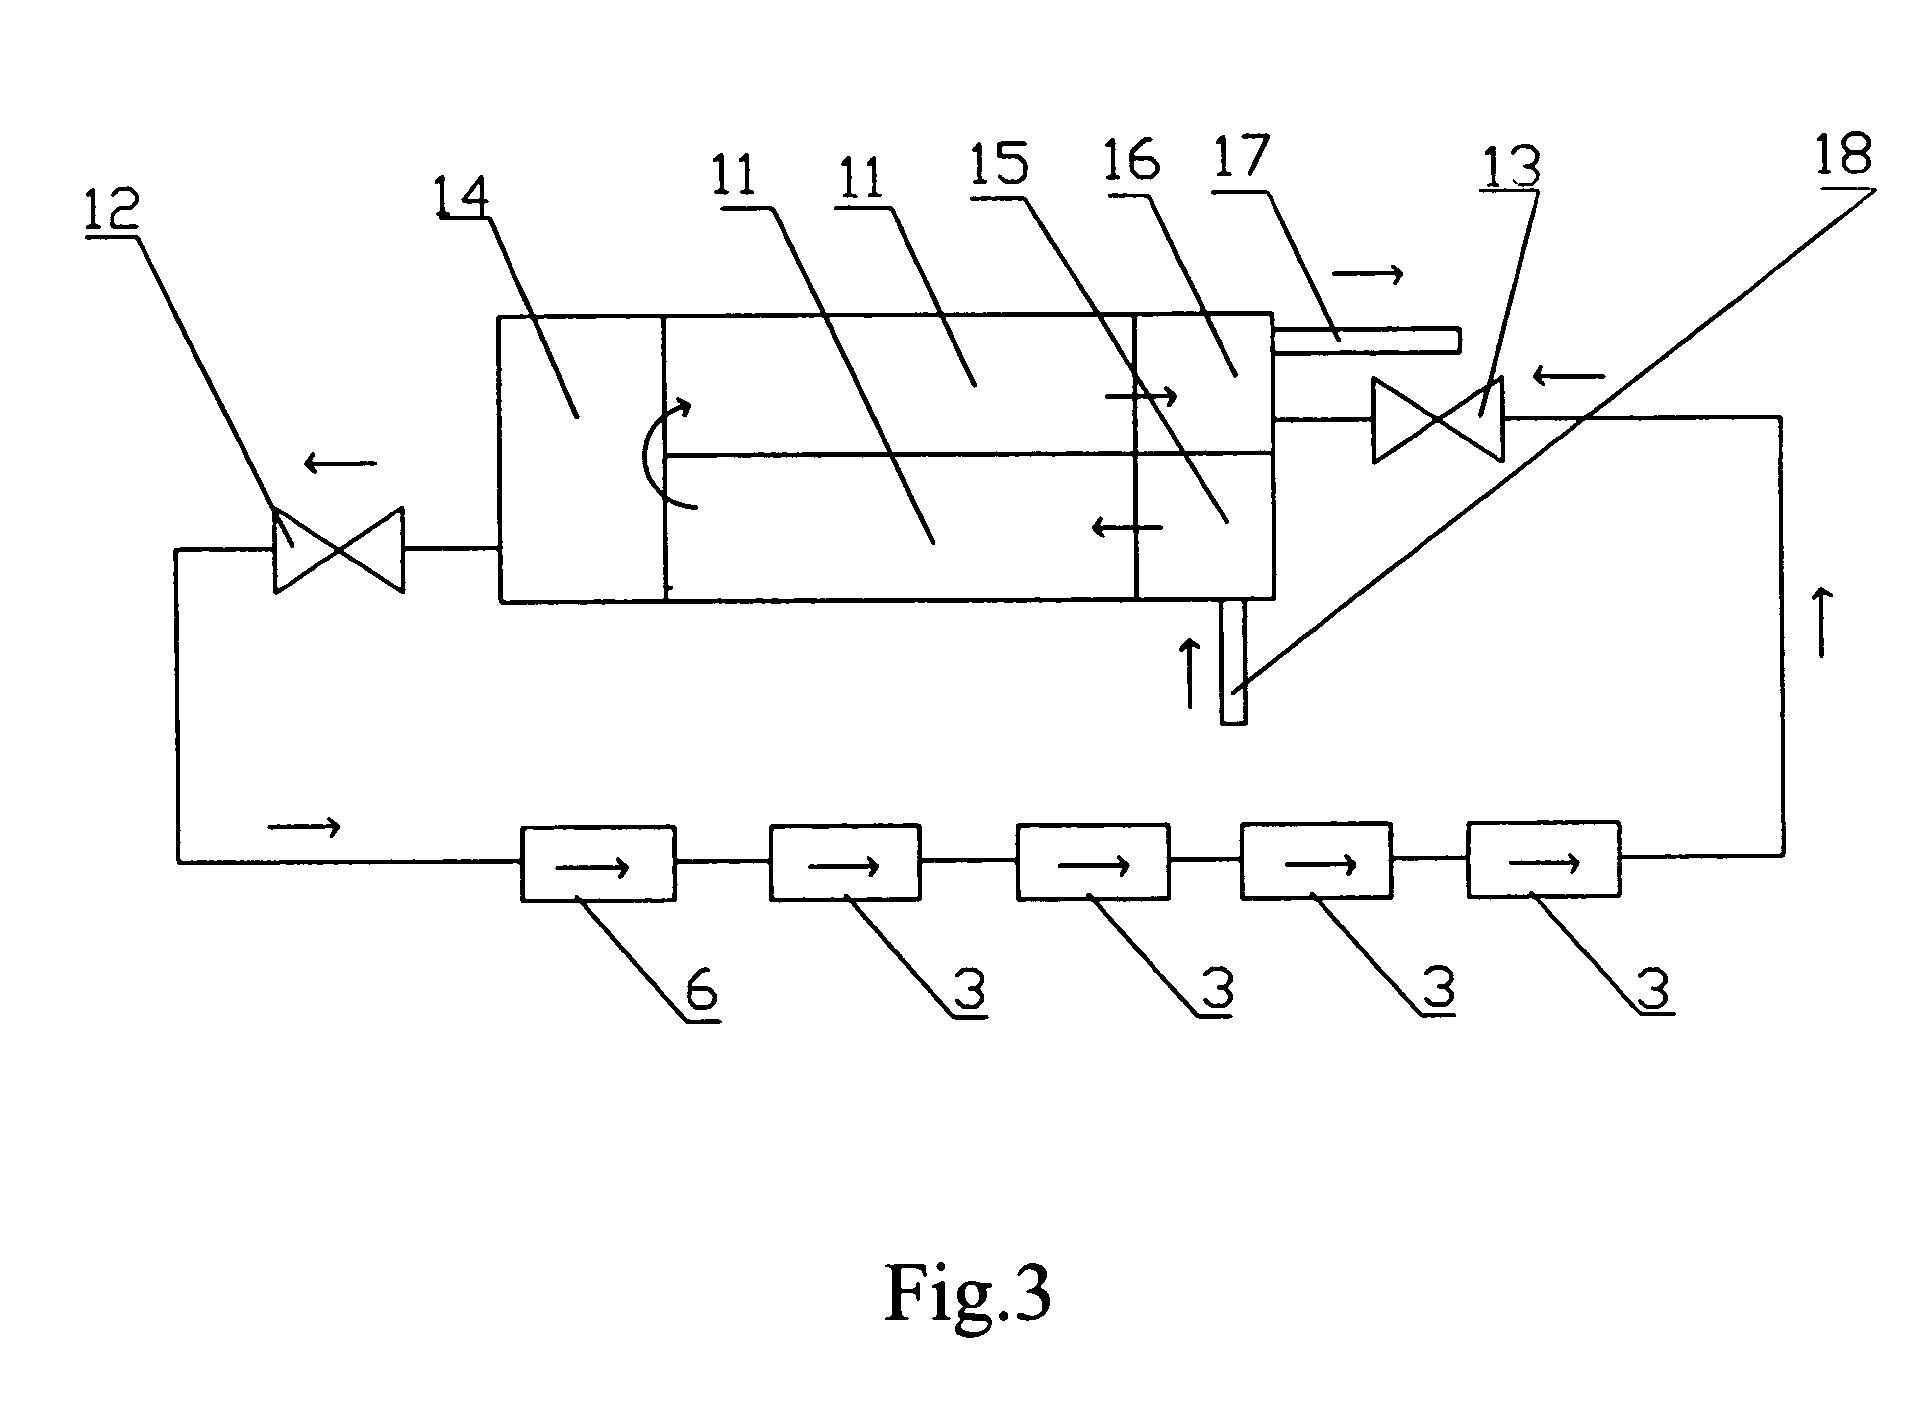 Method of producing sensors for monitoring corrosion of heat-exchanger tubes